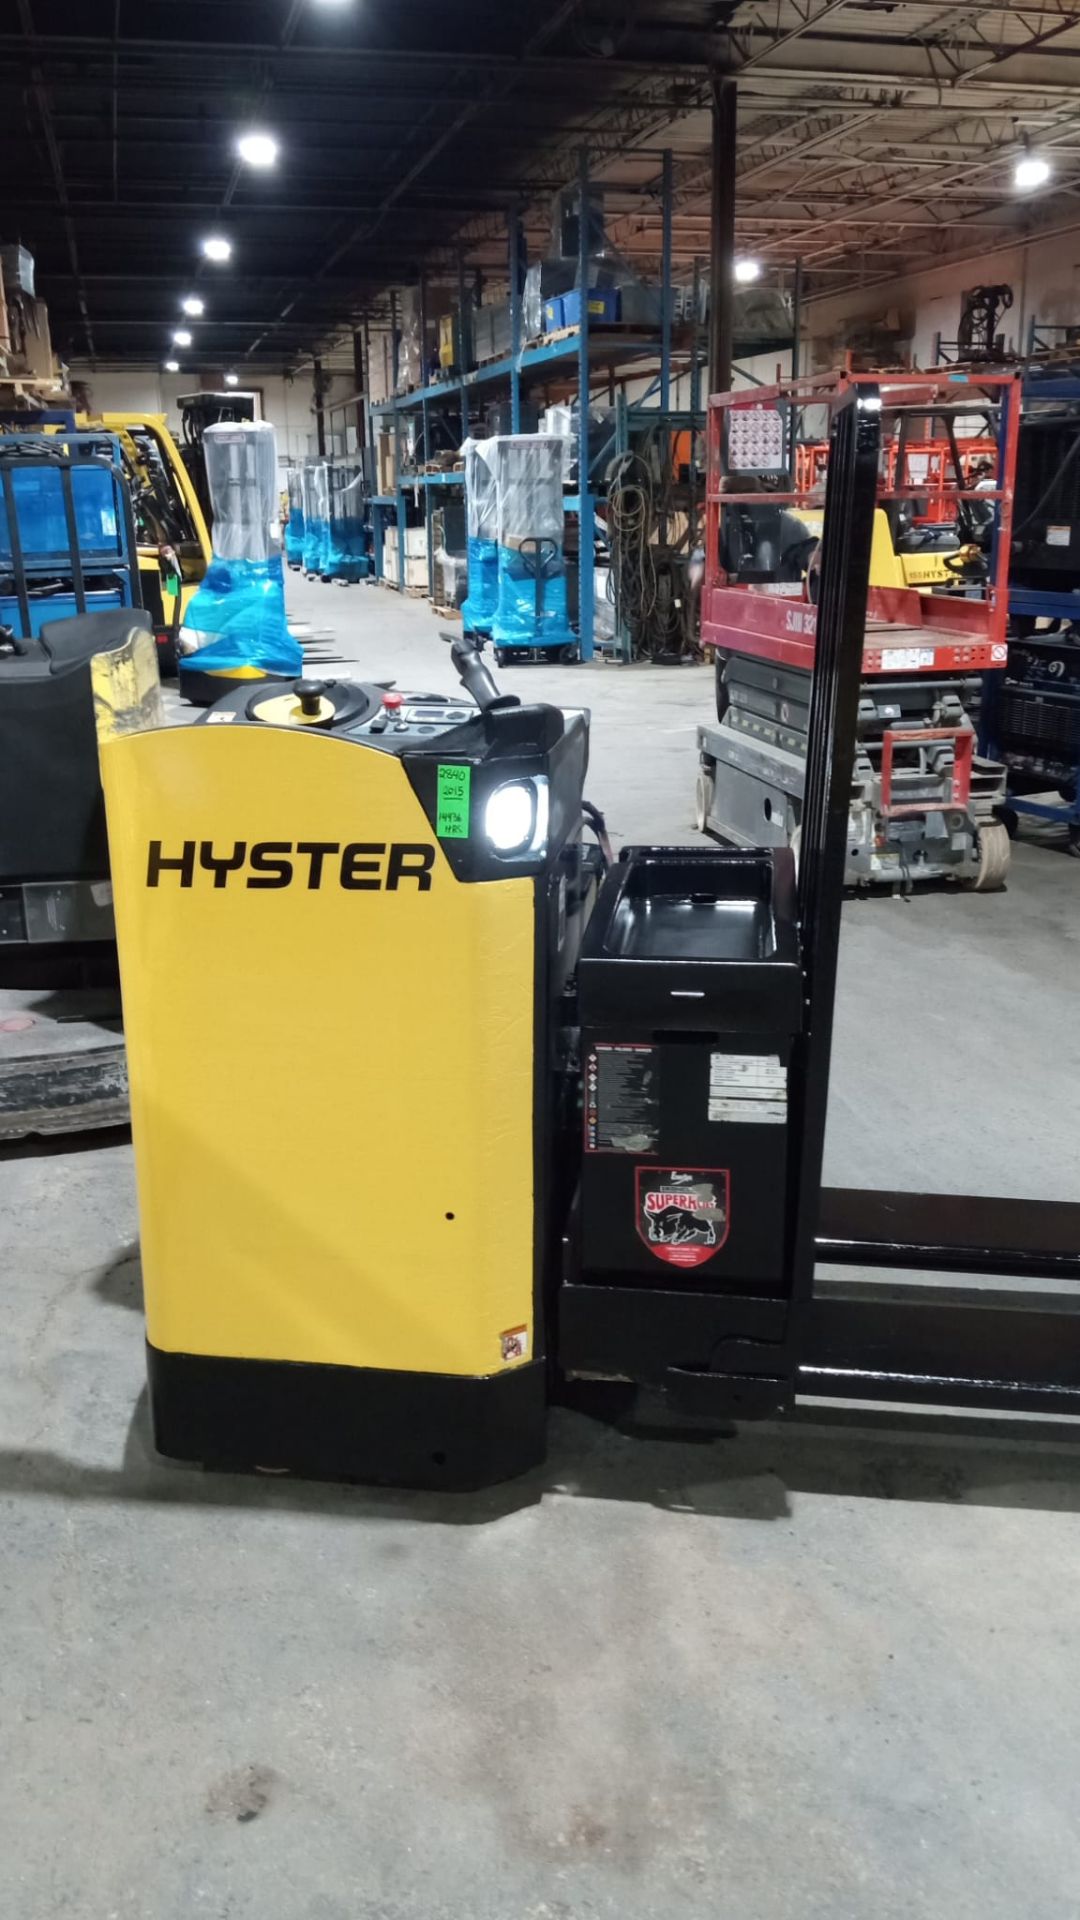 2015 Hyster RIDE ON 8000lbs capacity LONG JOHN 8' Long Forks Powered Pallet Cart 24V - Ride on unit - Image 5 of 7